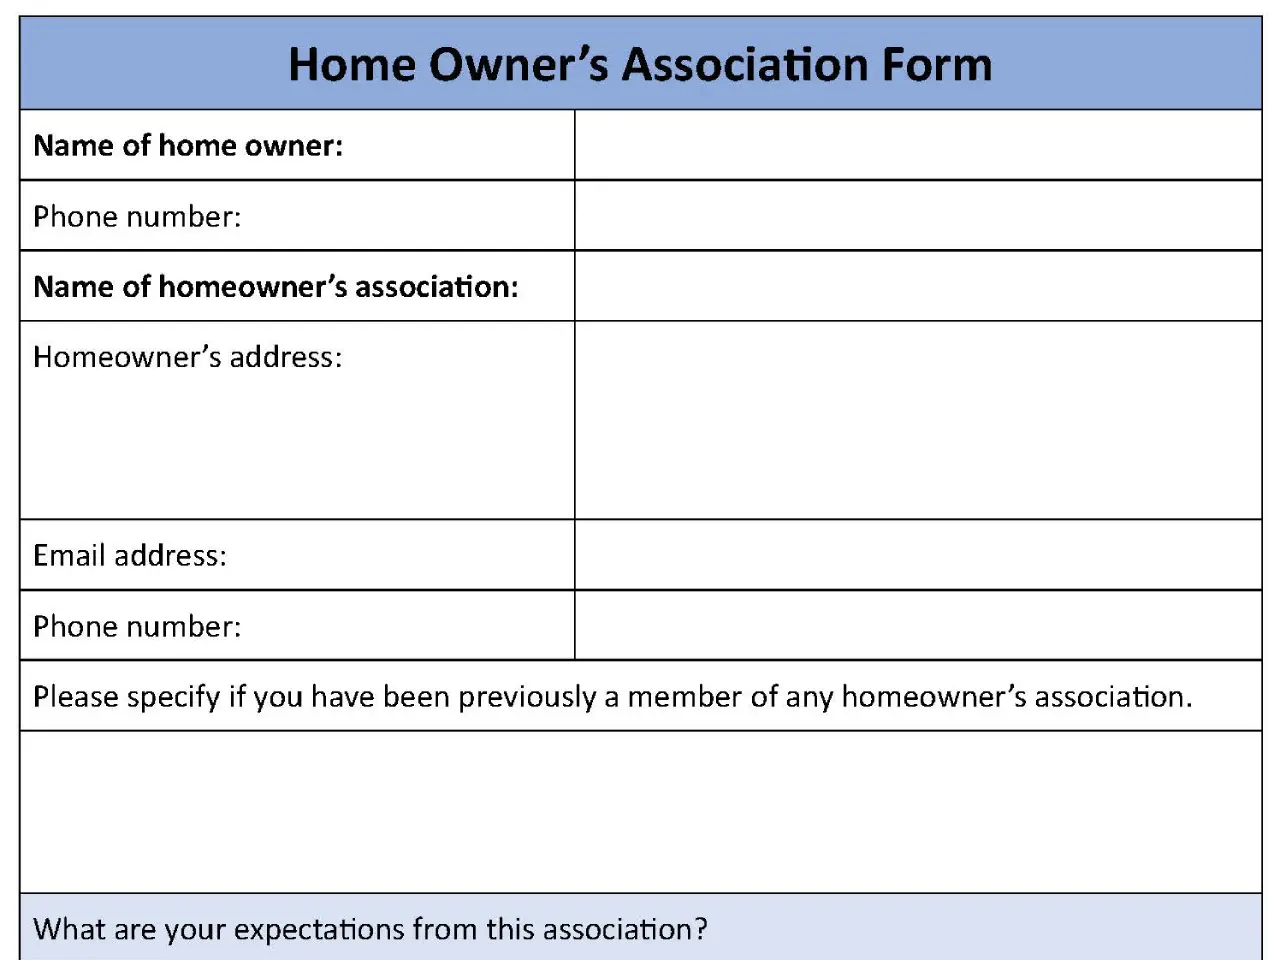 Home Owners Association Form